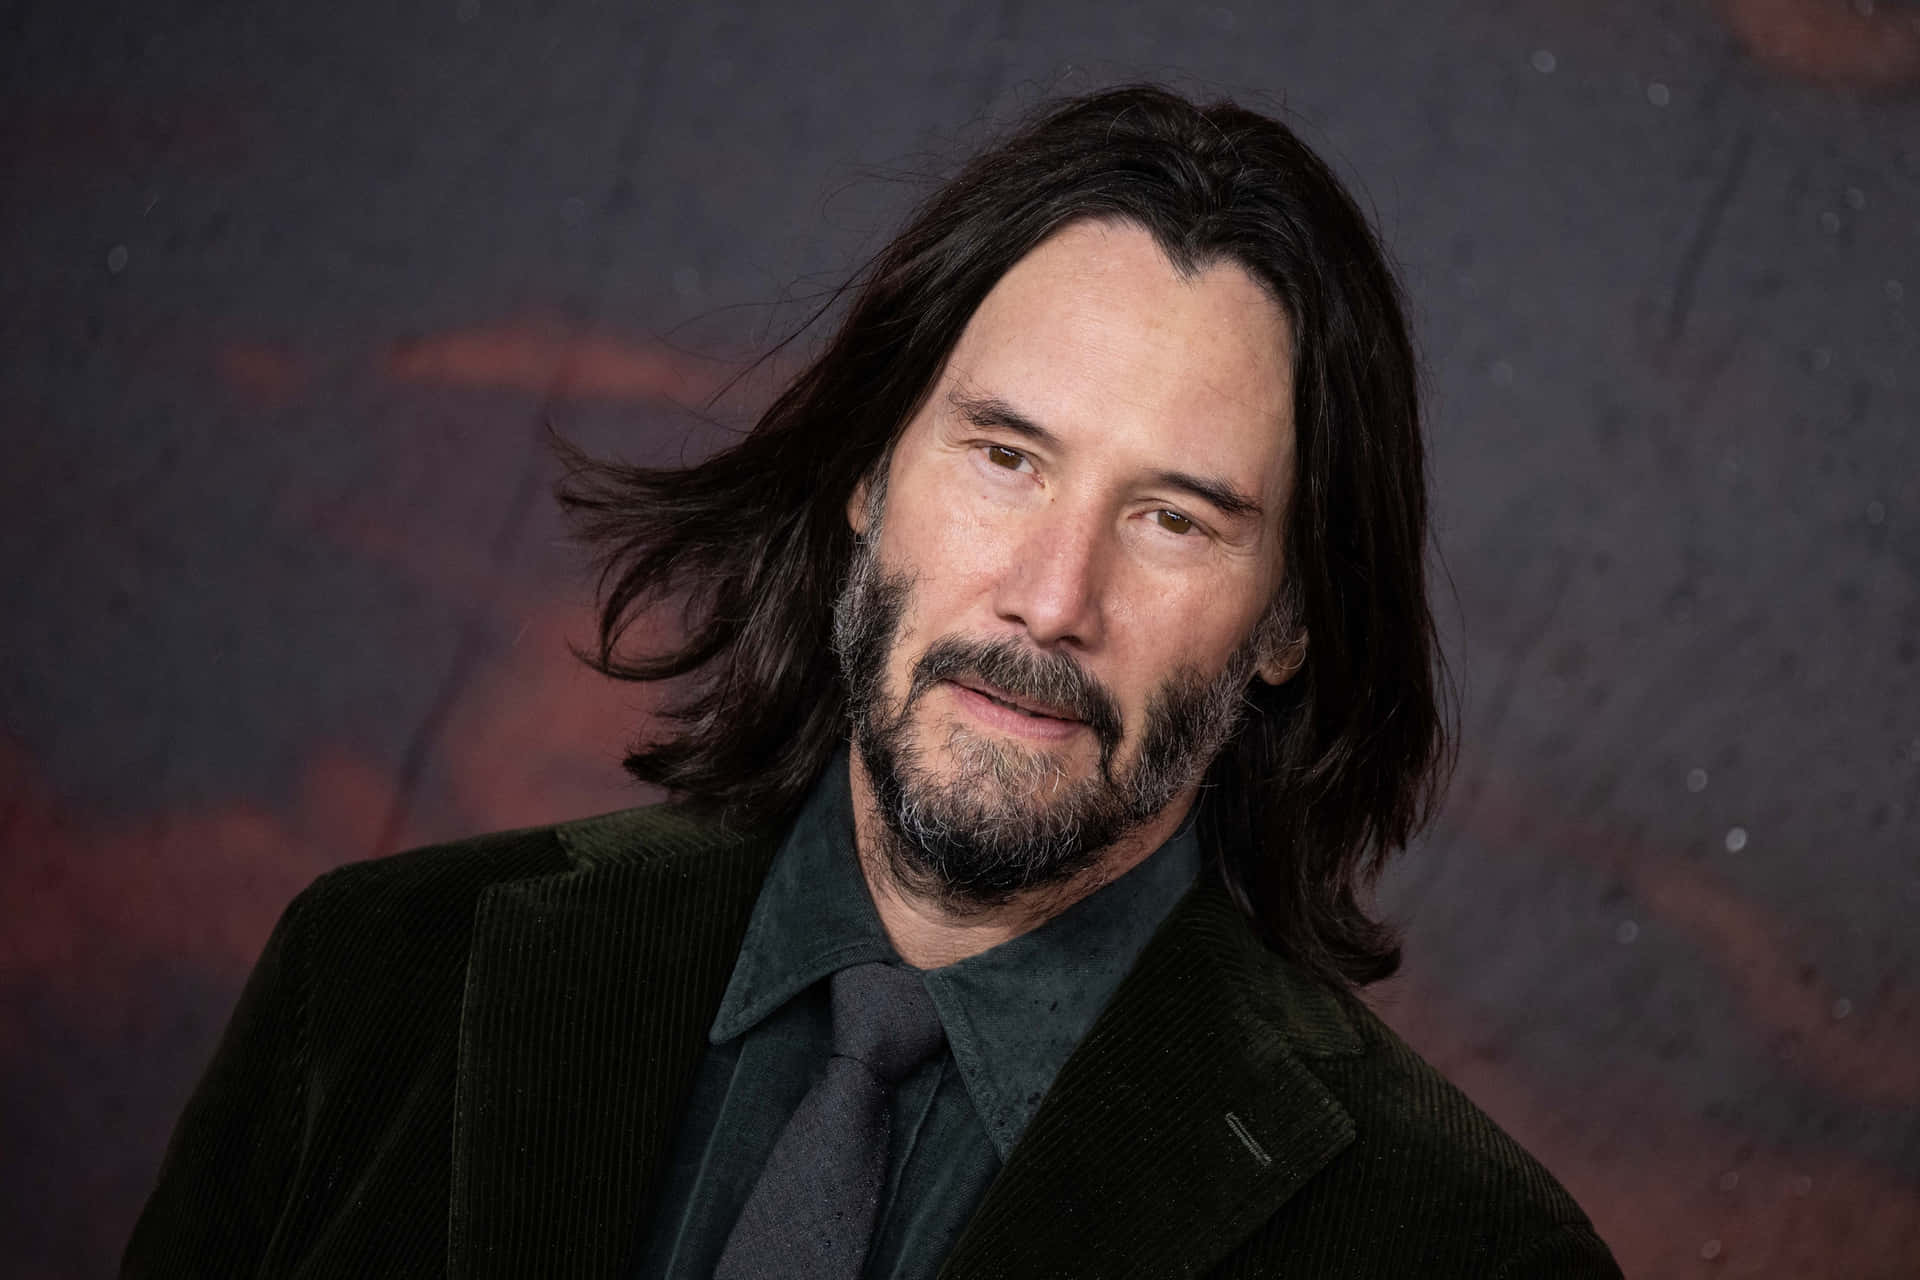 Keanu Reeves In A Profound Pose